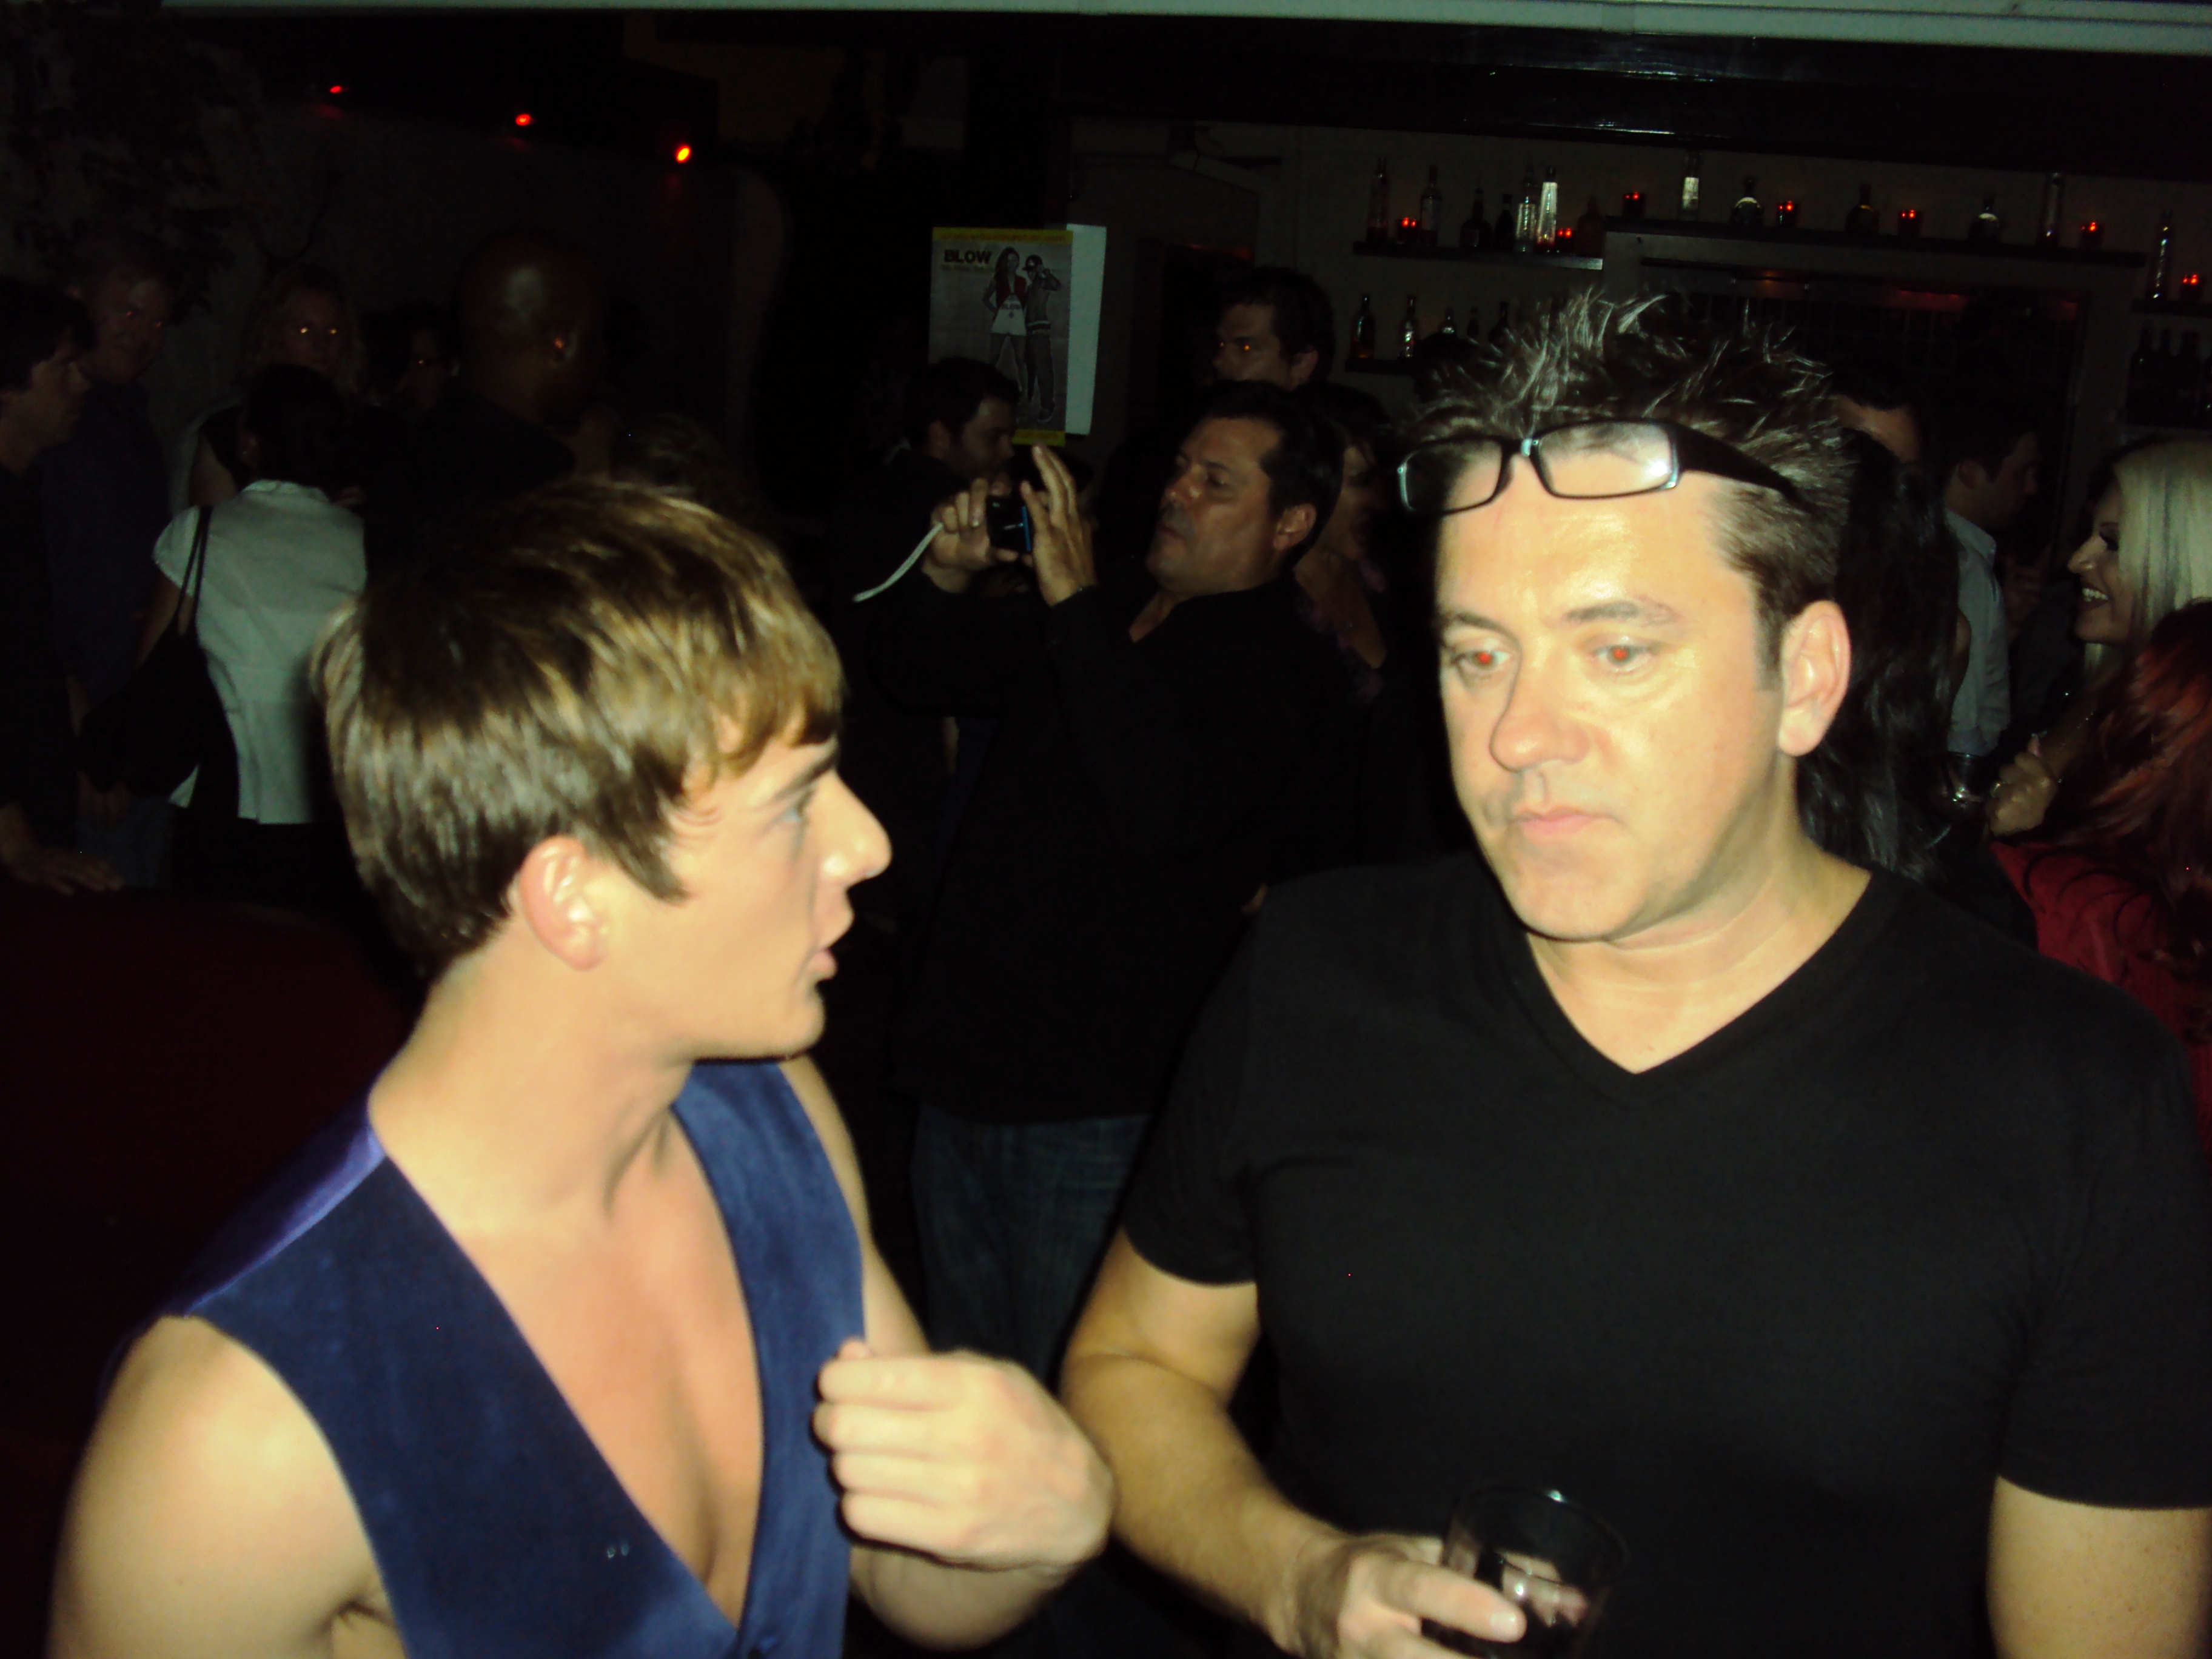 Sean Lockhart and Brian McCulley at the after party for 2001 Maniacs Field of Screams.